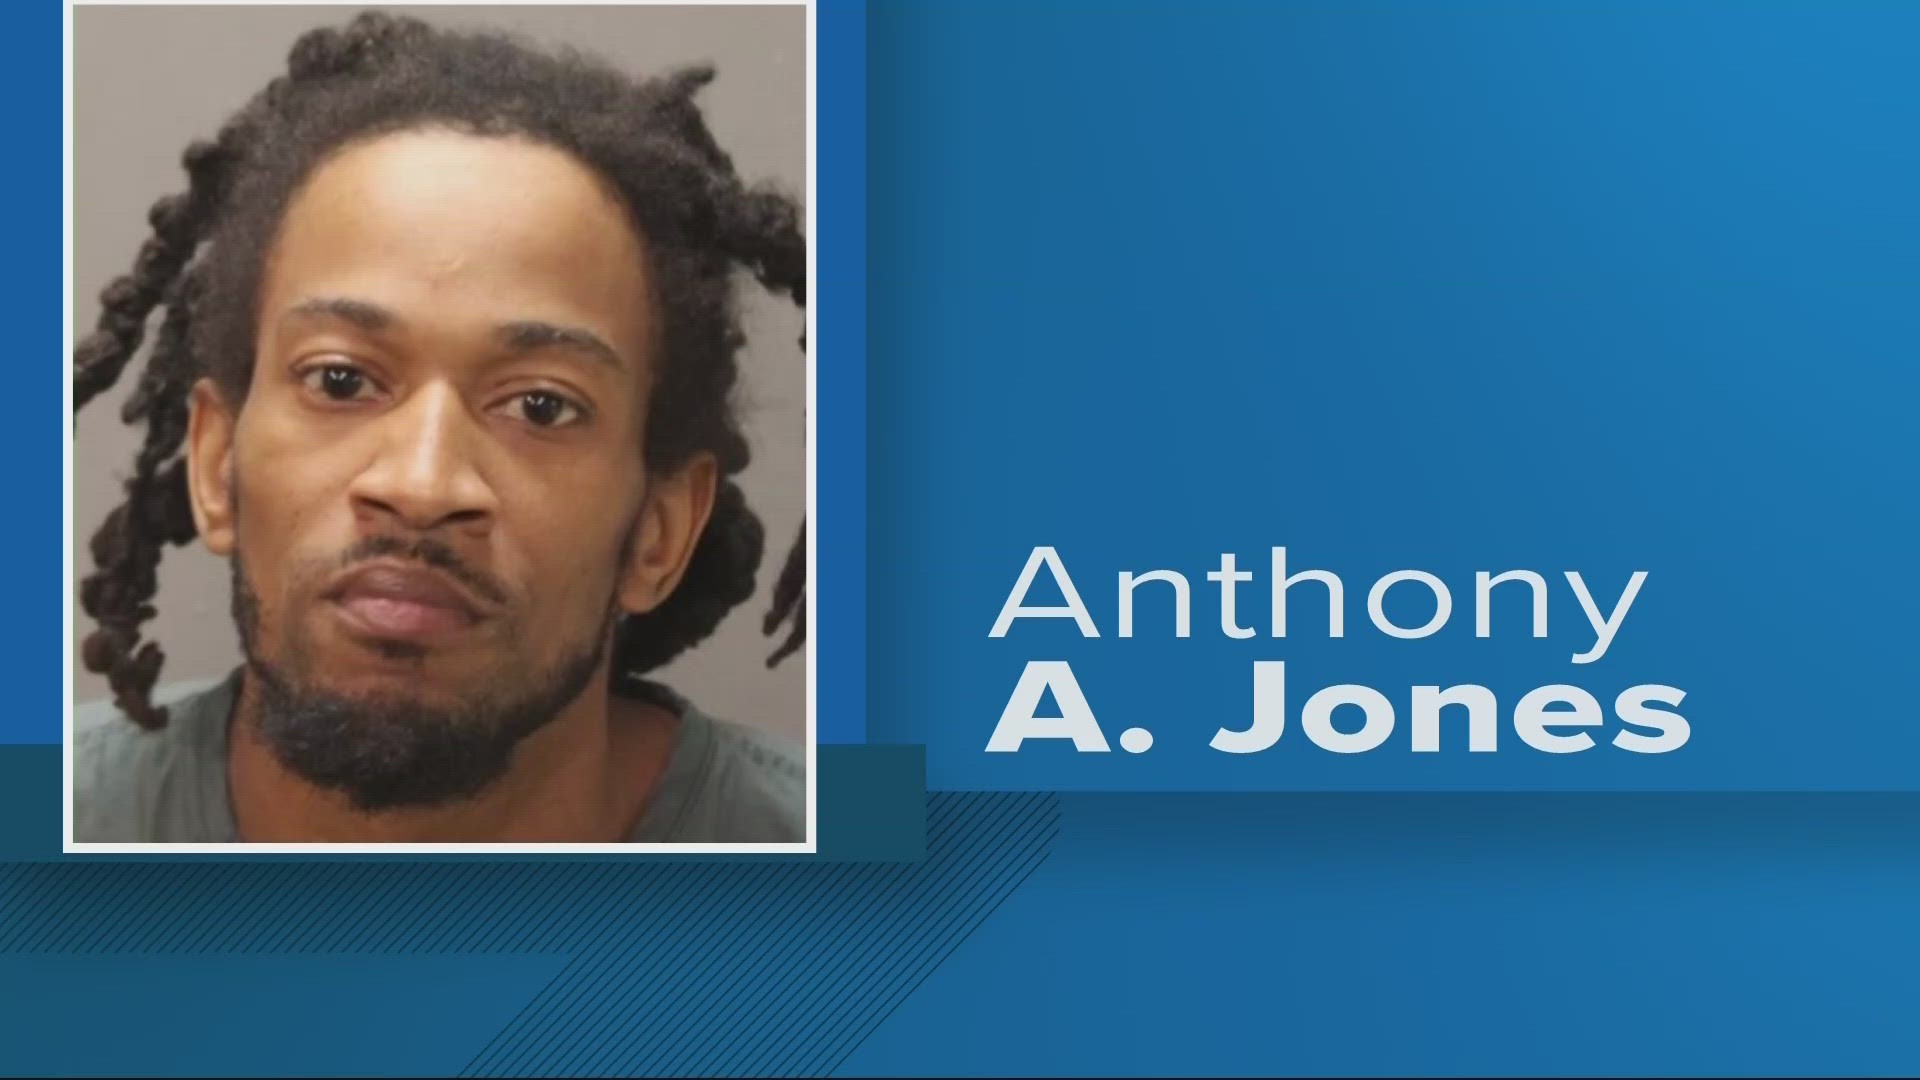 Anthony A. Jones, 34, was arrested by U.S. Marshals Tuesday.